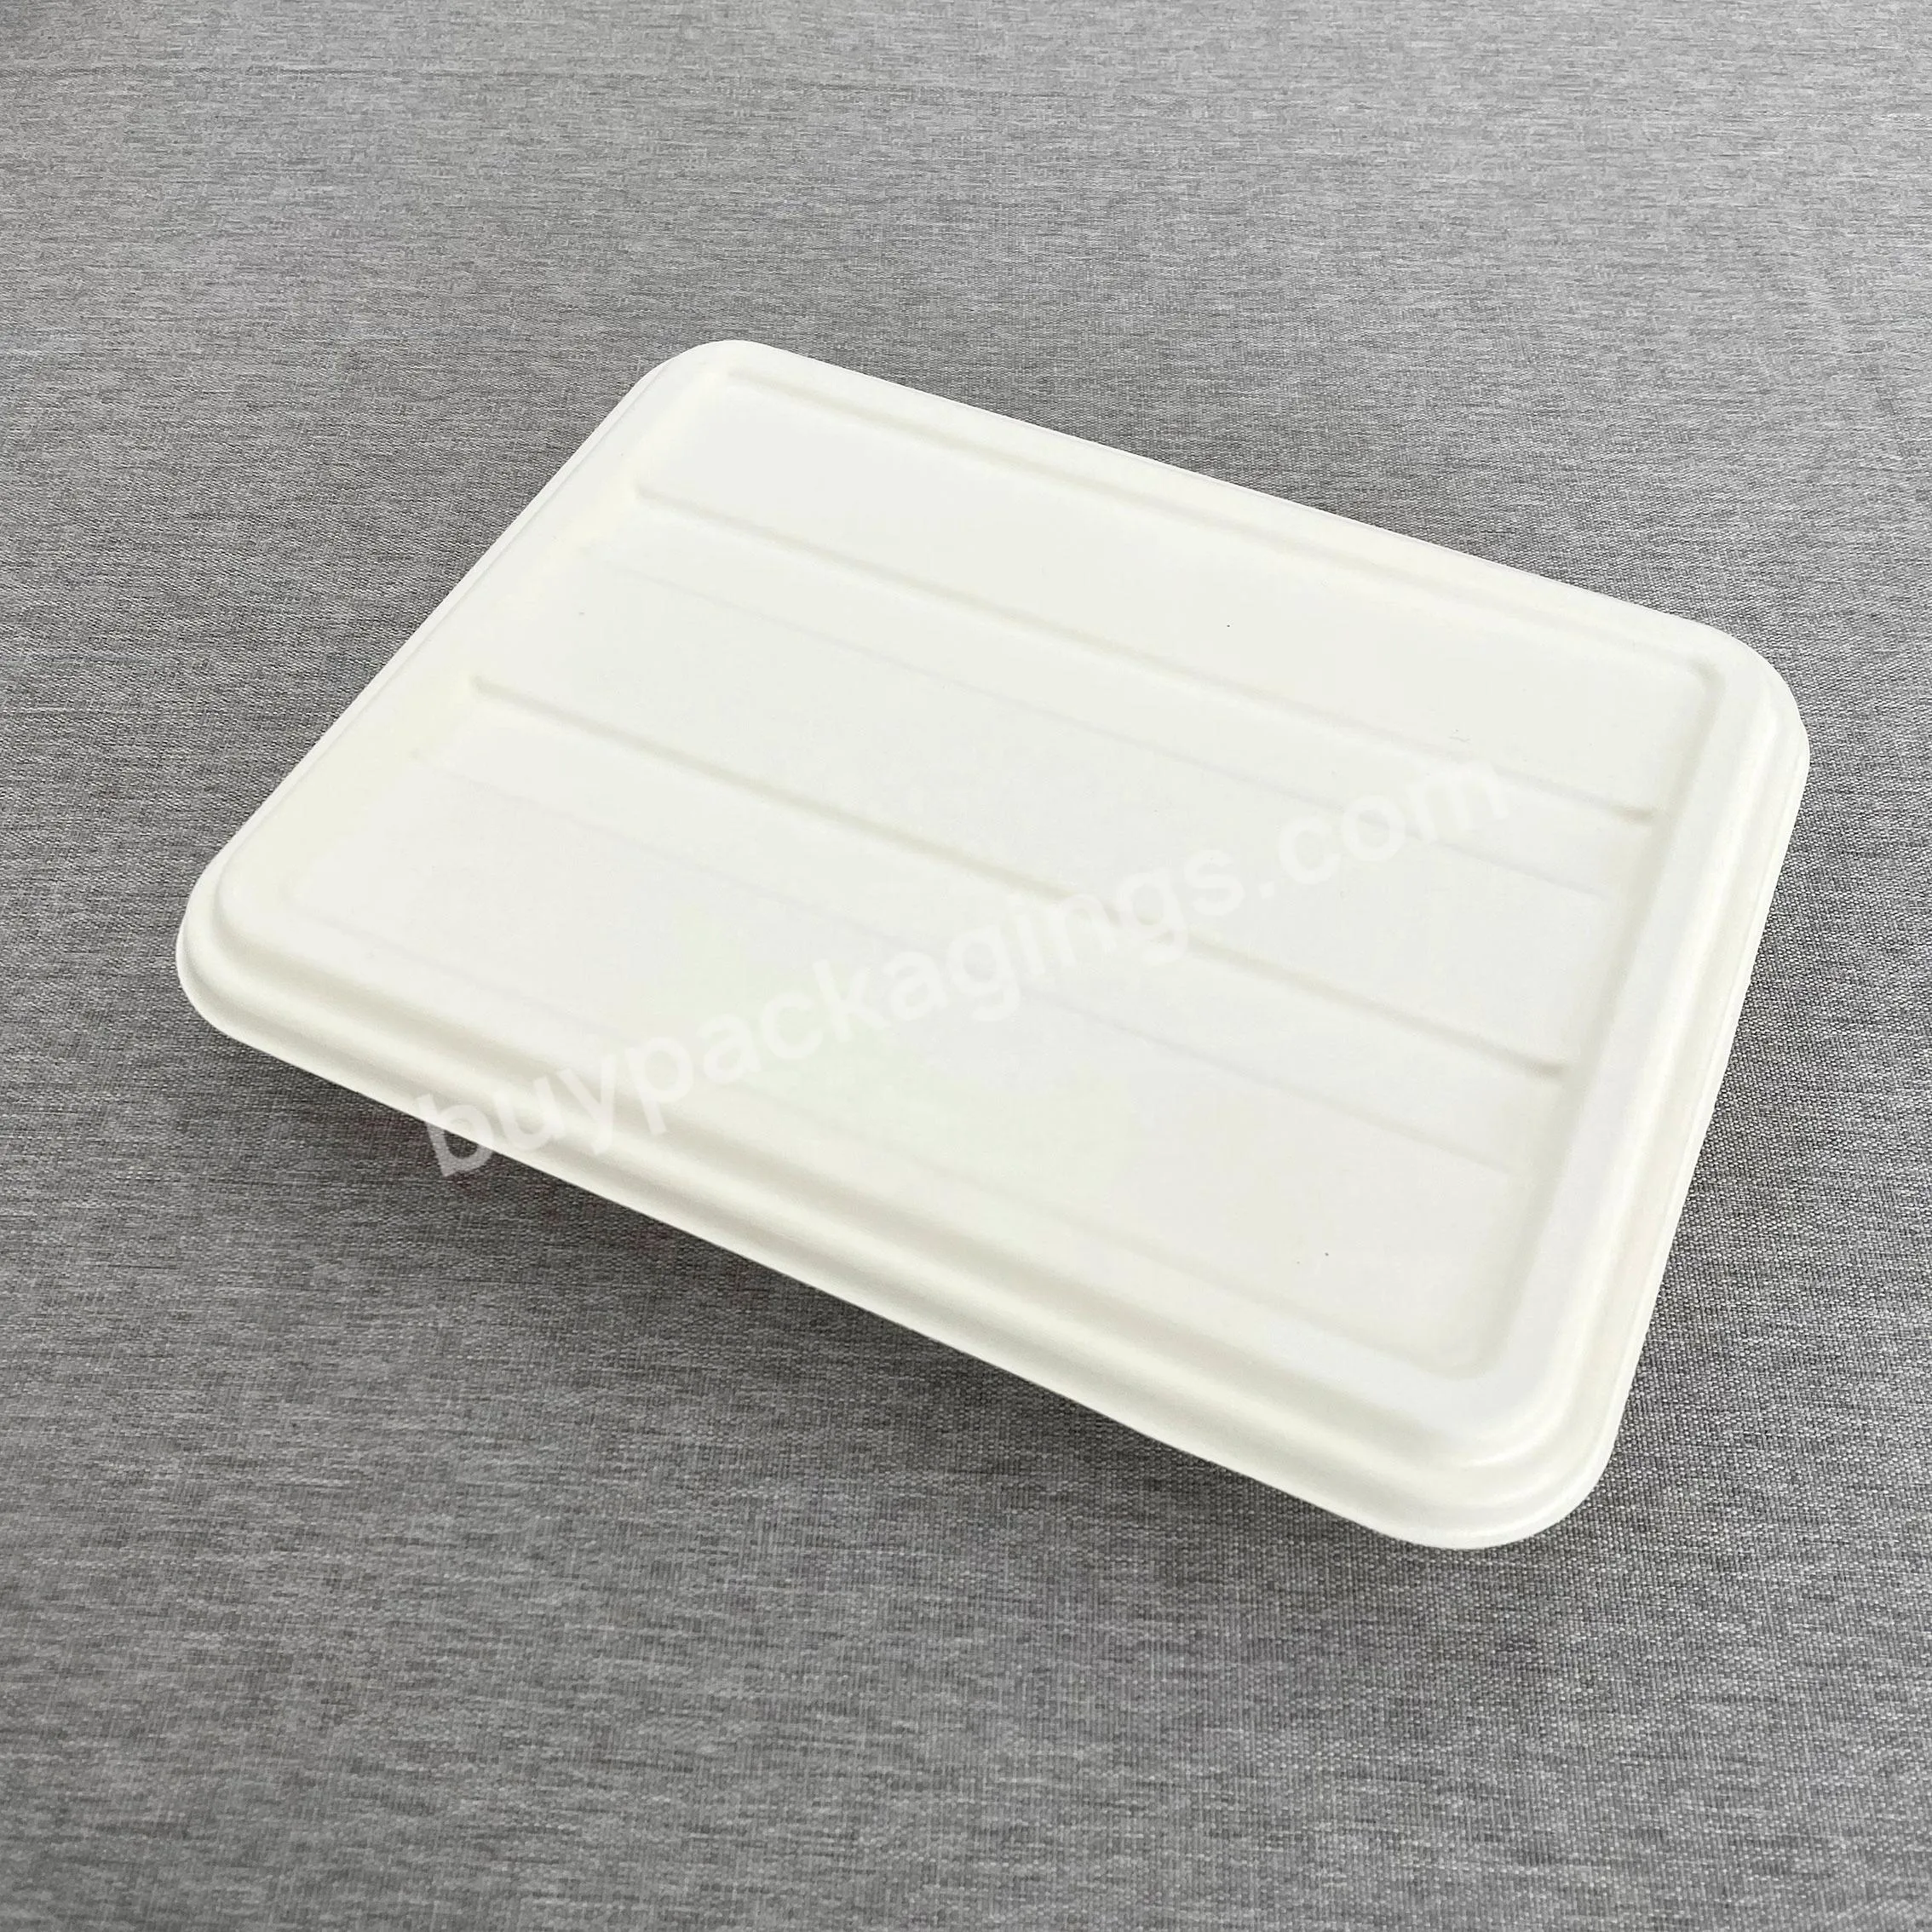 Luxury Airtight Takeaway Food Storage Containers Paper Box Plate Serving Tray With Bamboo Lids And Cover - Buy Airtight Food Storage Containers With Bamboo Lids,Containers With Lids Food,Takeaway Food Paper Box With Lid.